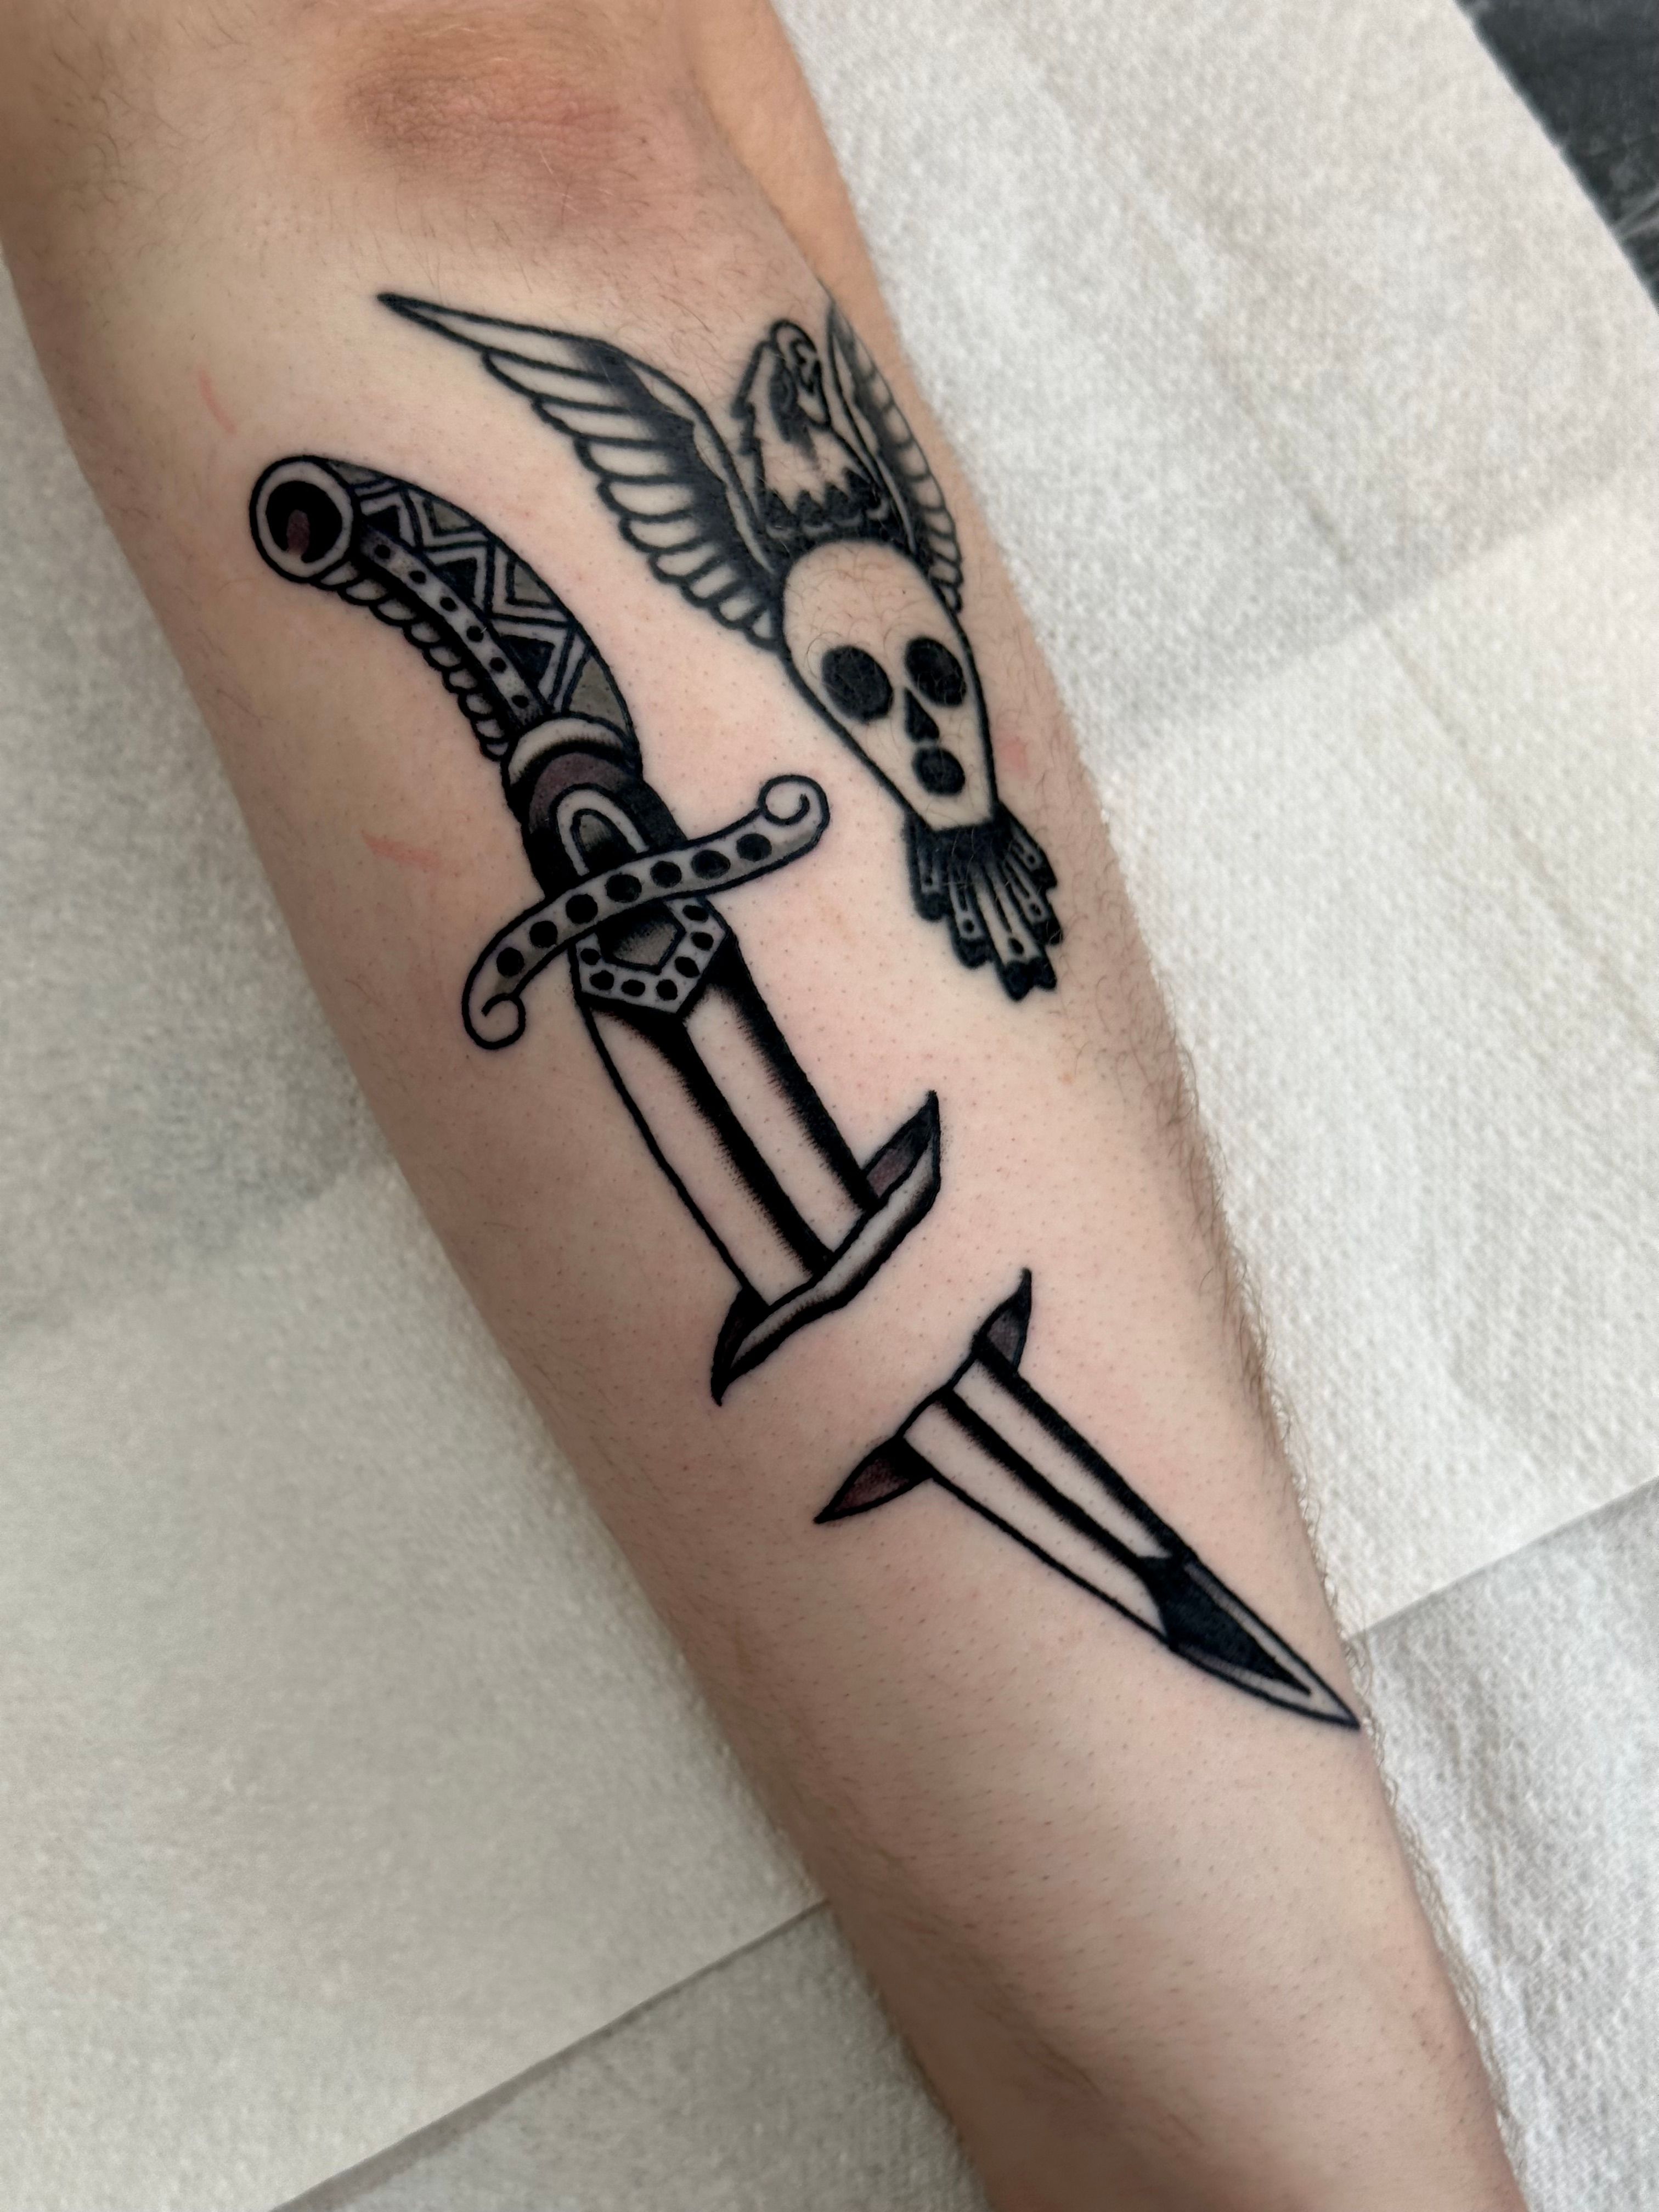 Heart and Dagger Tattoo | Super cute tattoos done by Bill! If you like what  you see, make sure to stop by the shop to book with him! - - - - - #tattoo # tattoos #ta... | Instagram